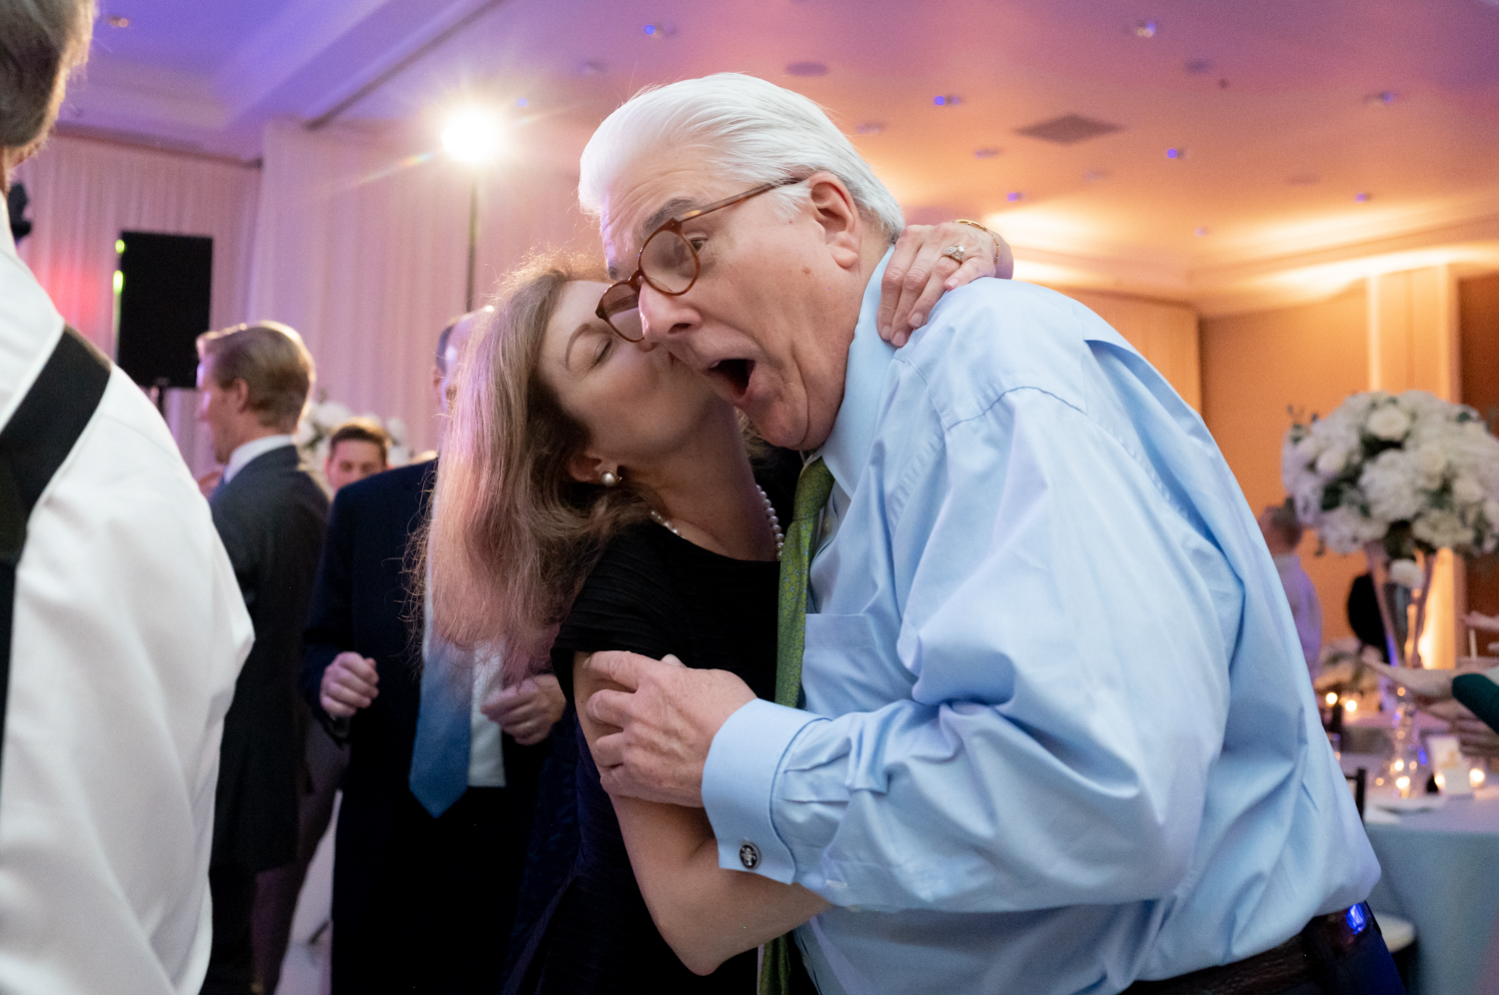 An older couple dances together at the reception.